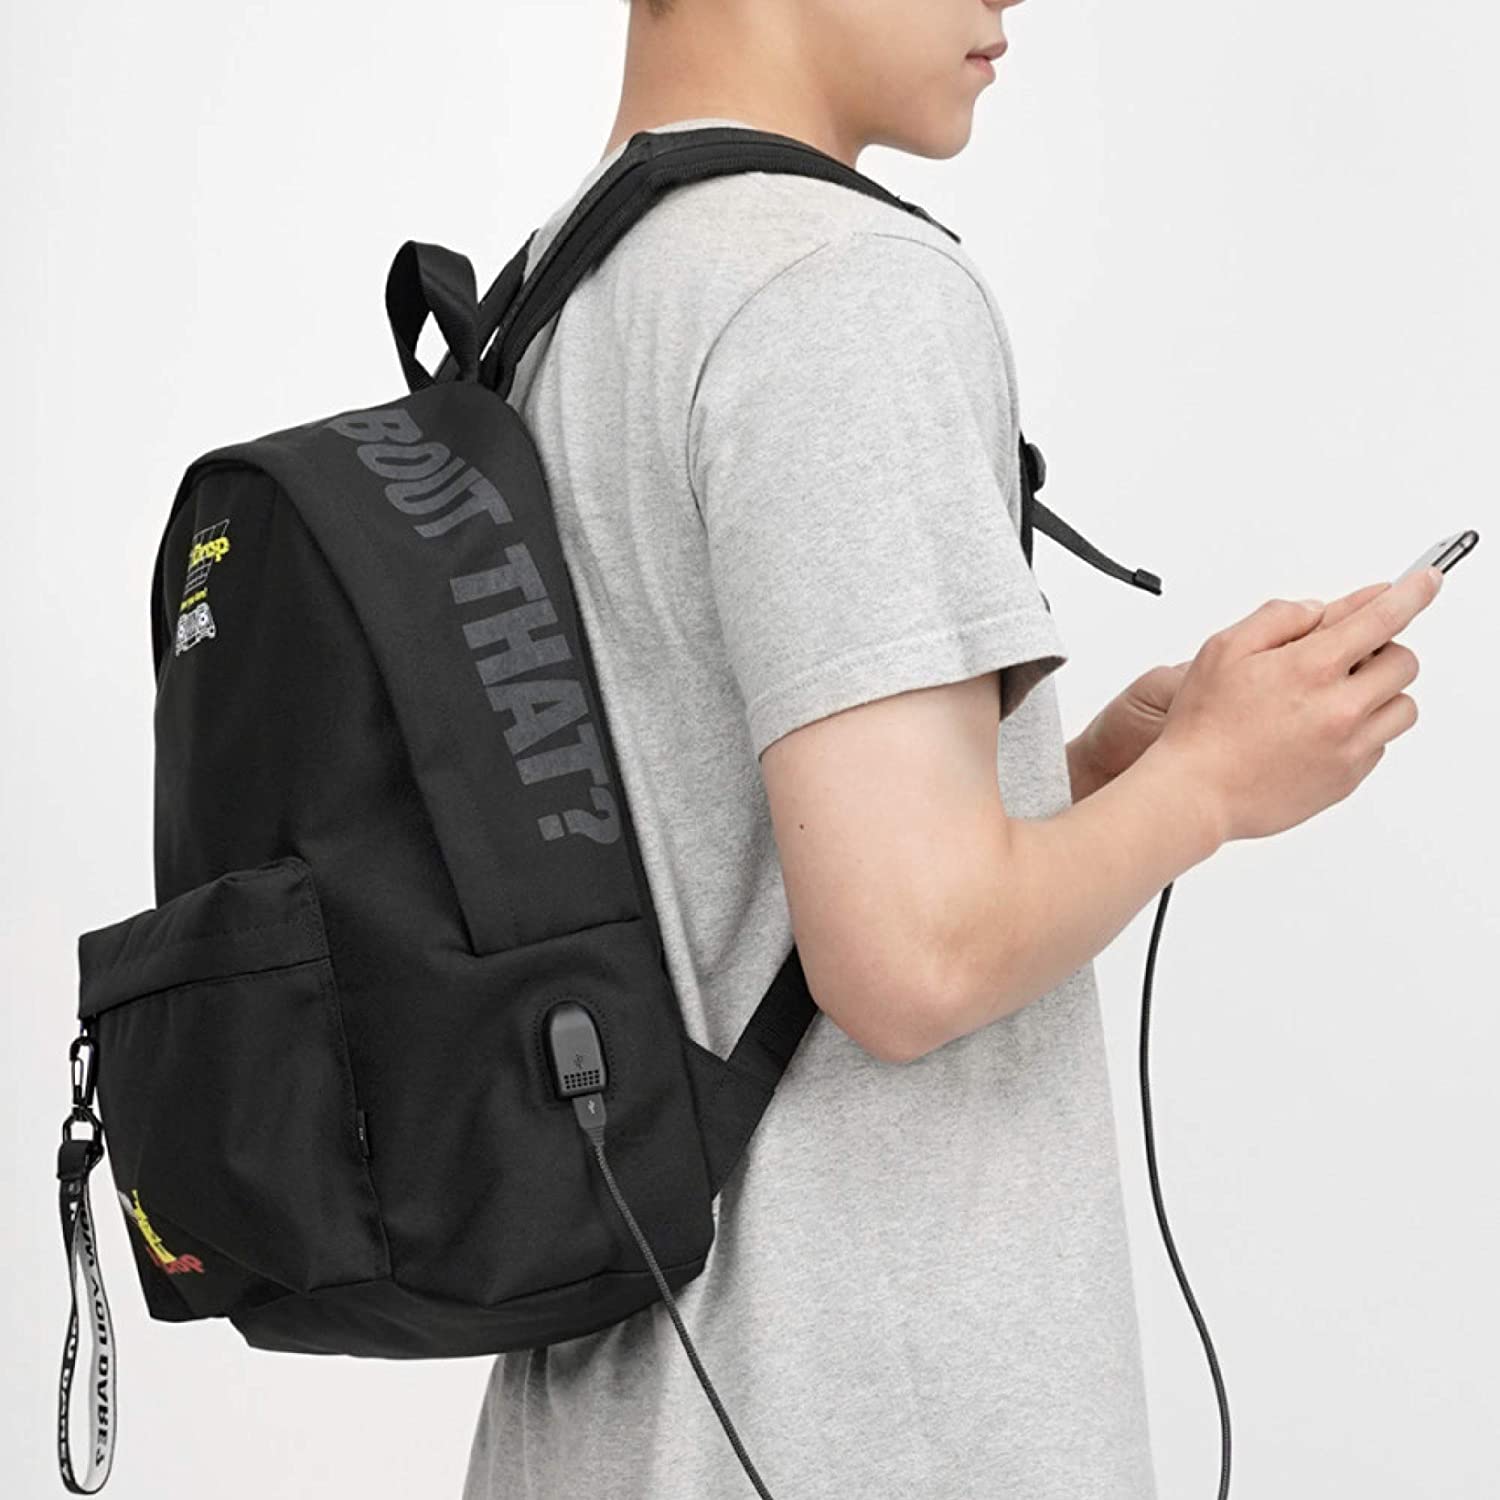 BTS Backpack MIC Drop with Smart USB Charging Port